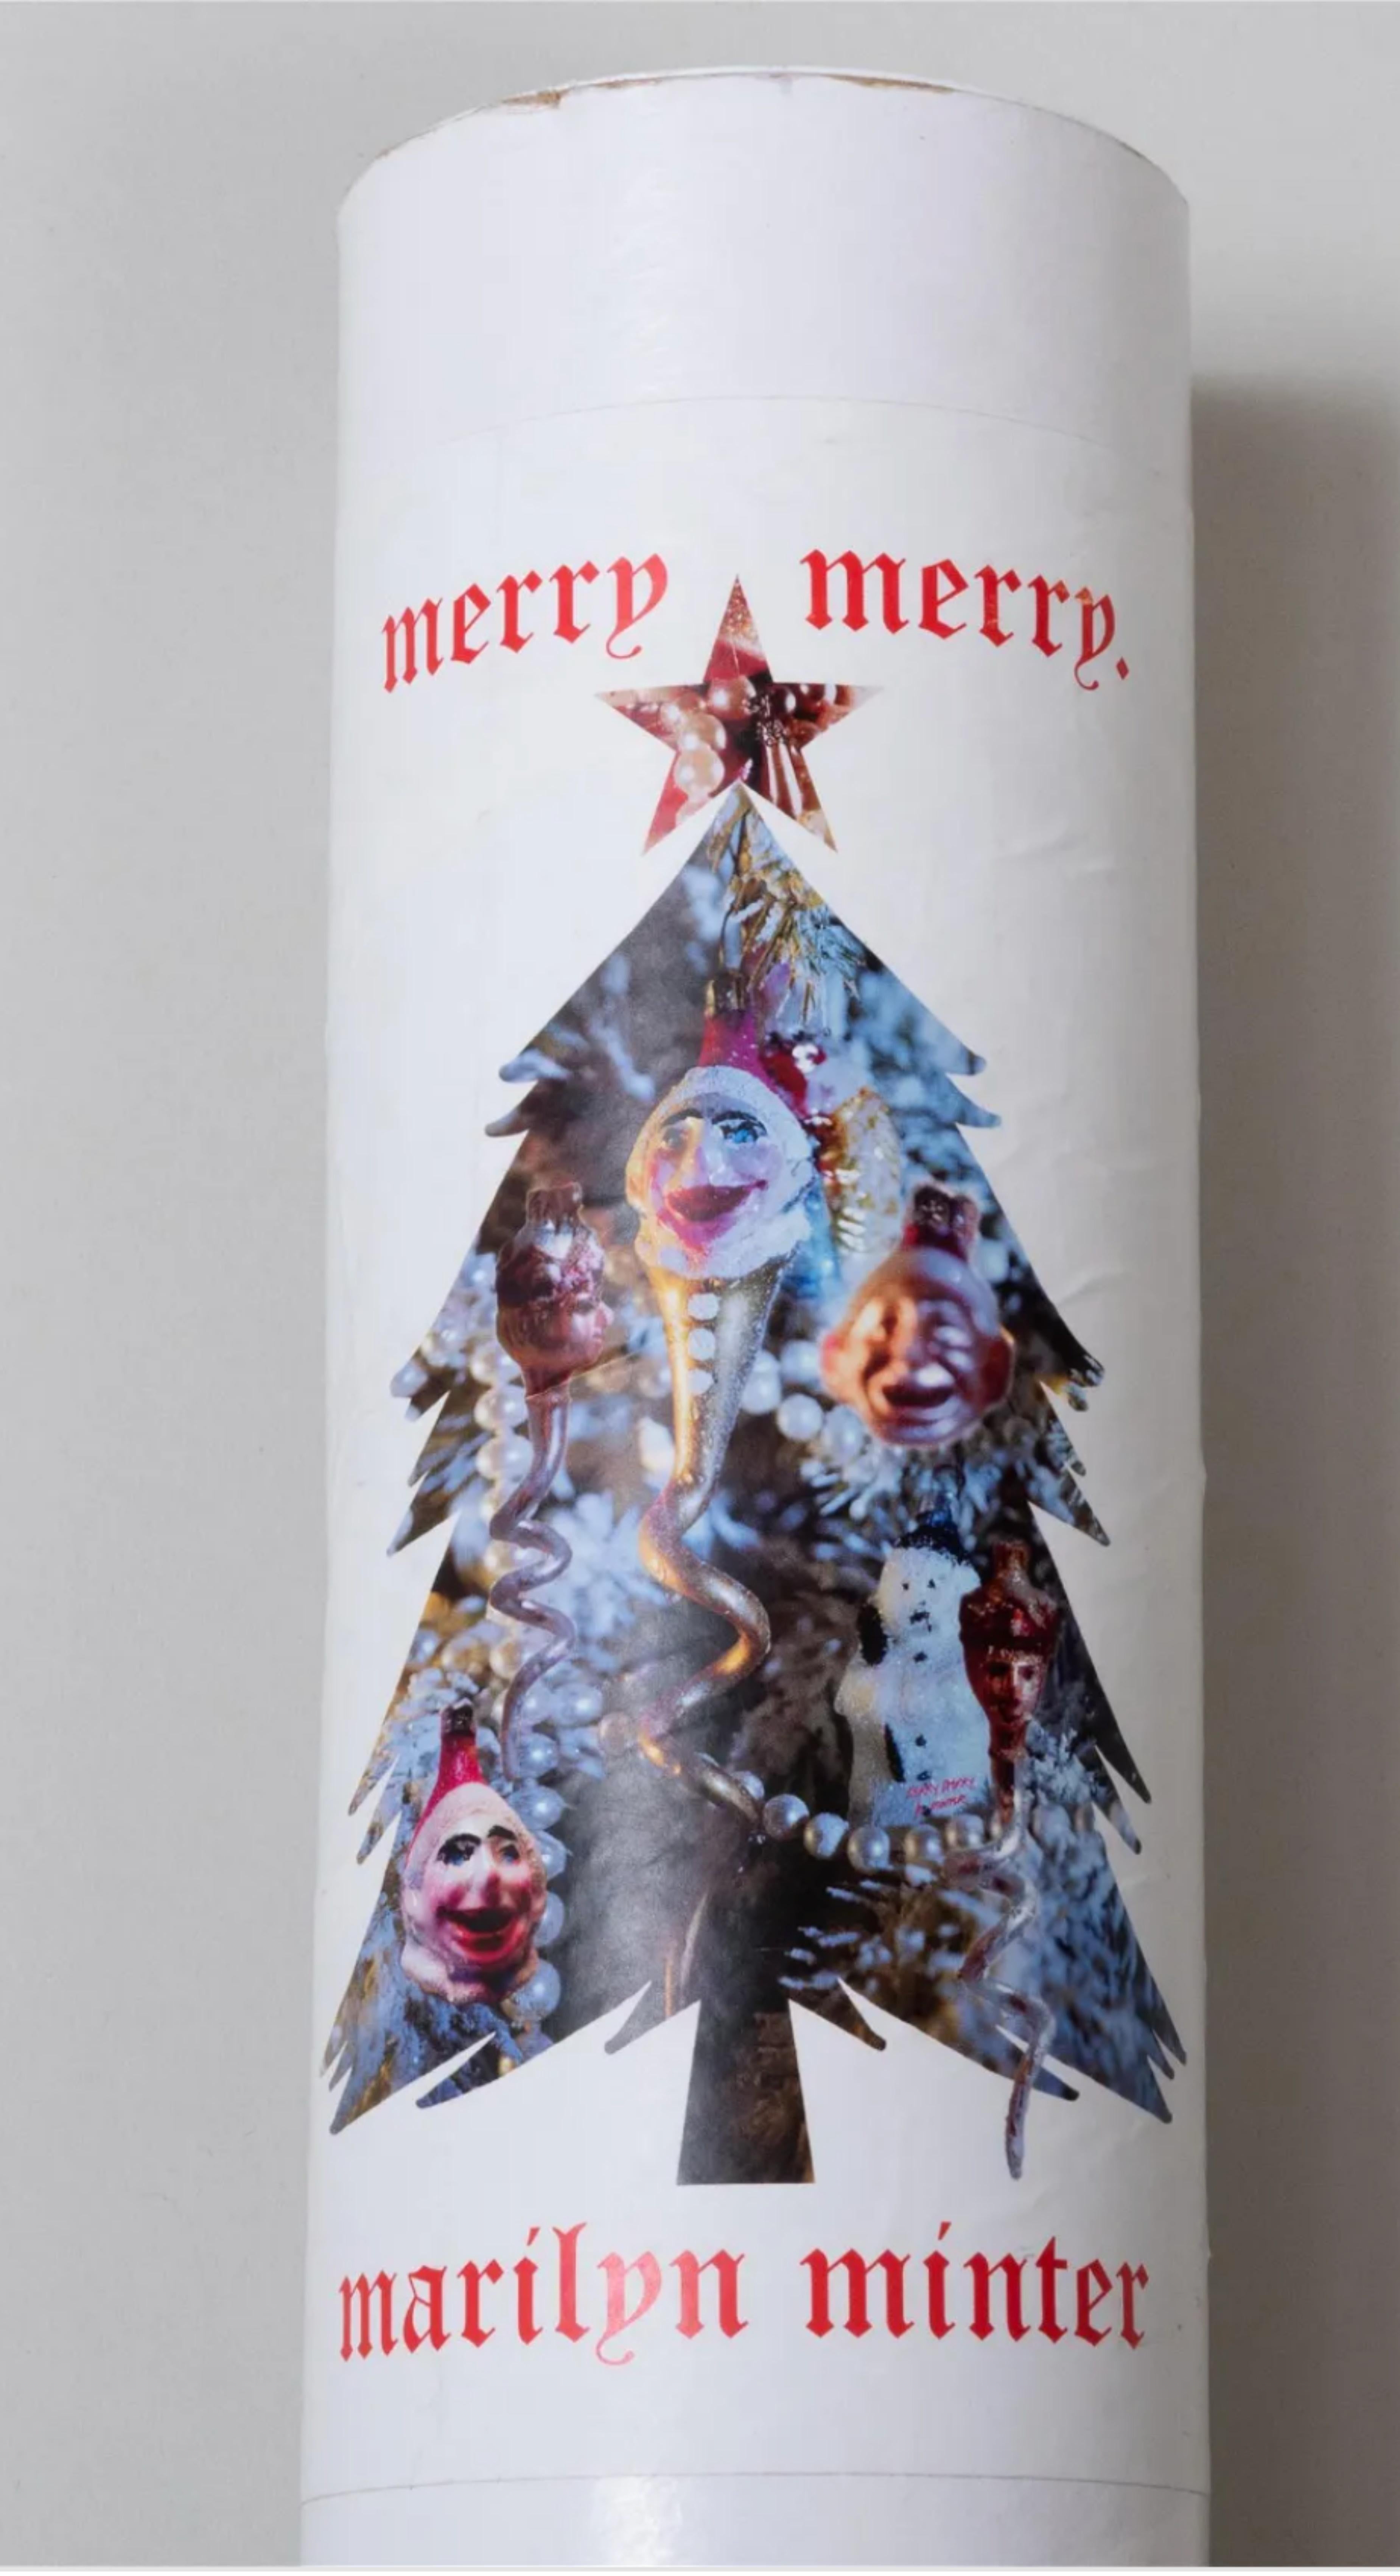 Marilyn Minter
Merry Merry: Limited Edition Large Christmas Stickers, 2007
One oversized sheet of die-cut vinyl stickers
Outside label on the tube is from Marilyn Minter's studio which the artist has hand addressed to the recipient, collector Melva